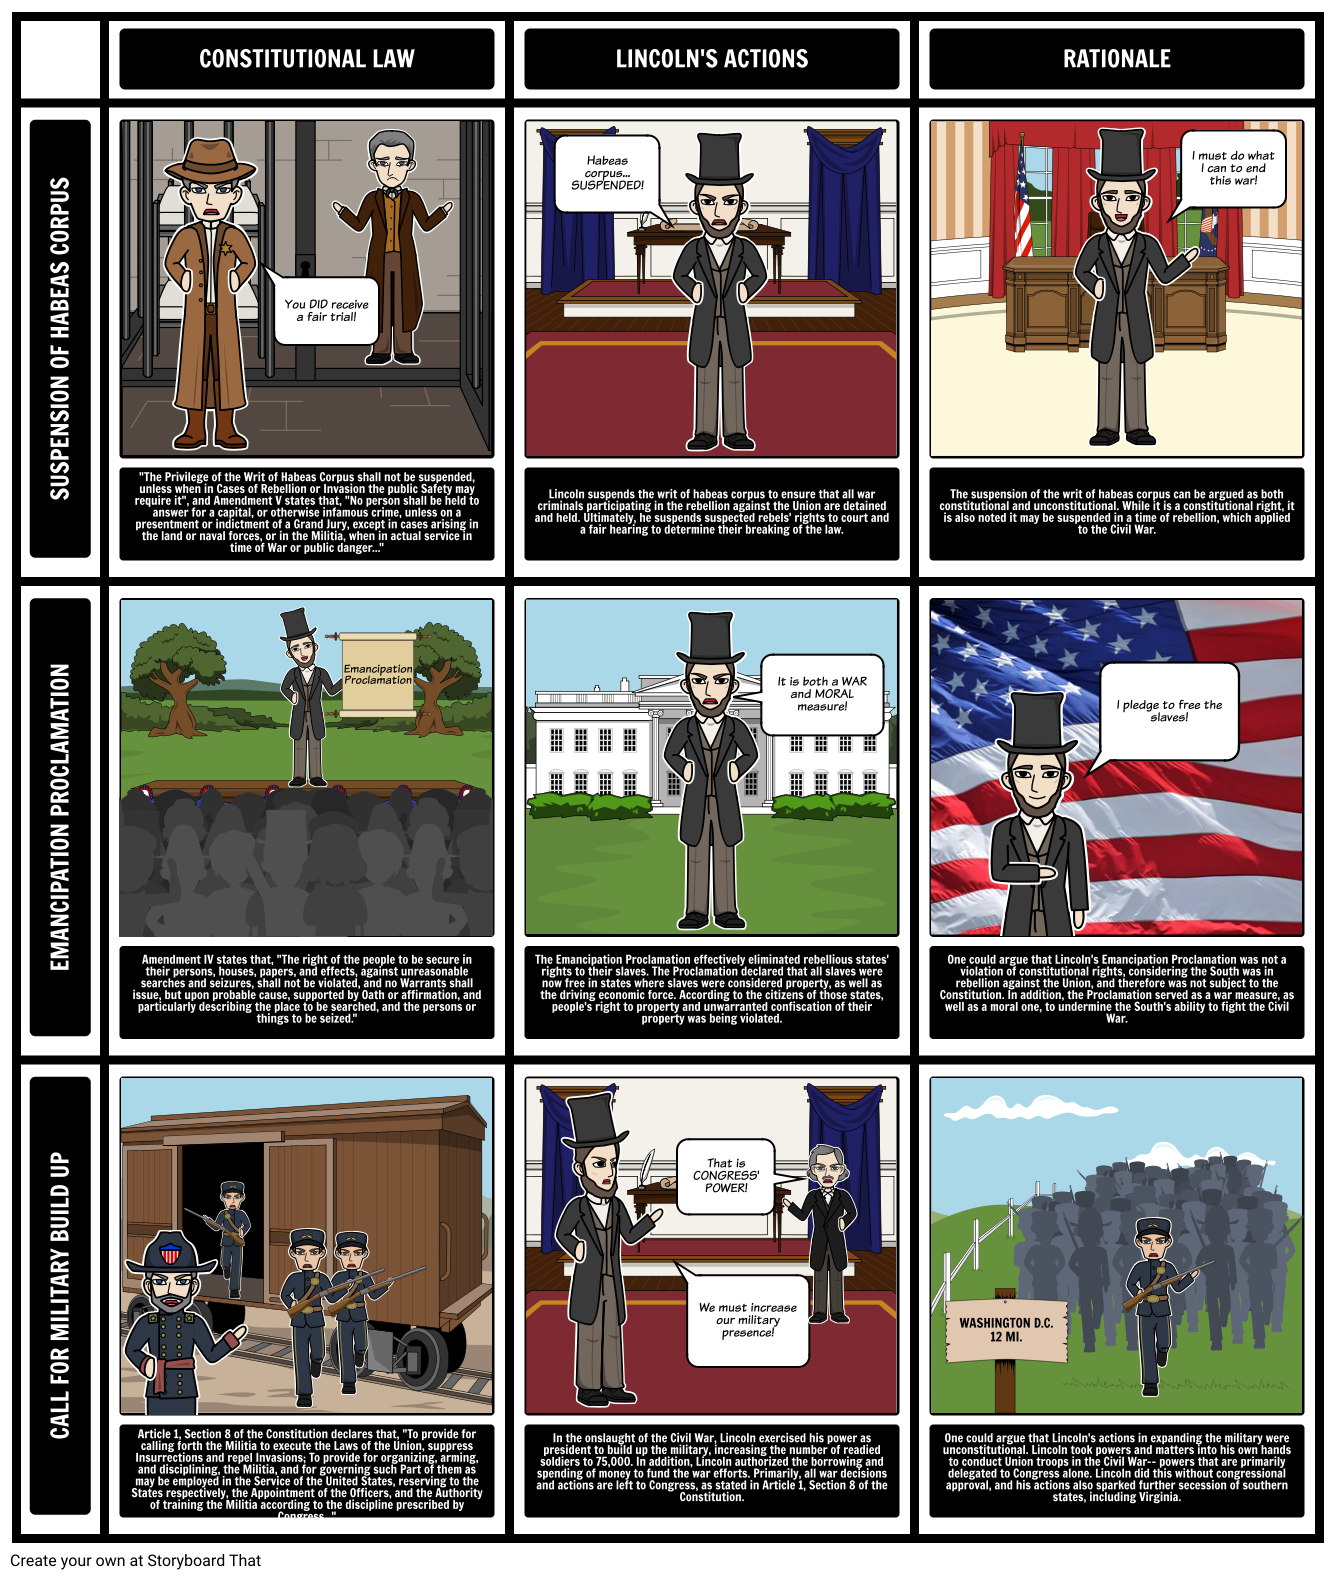 Lincoln's Expansion of Powers and its Constitutionality